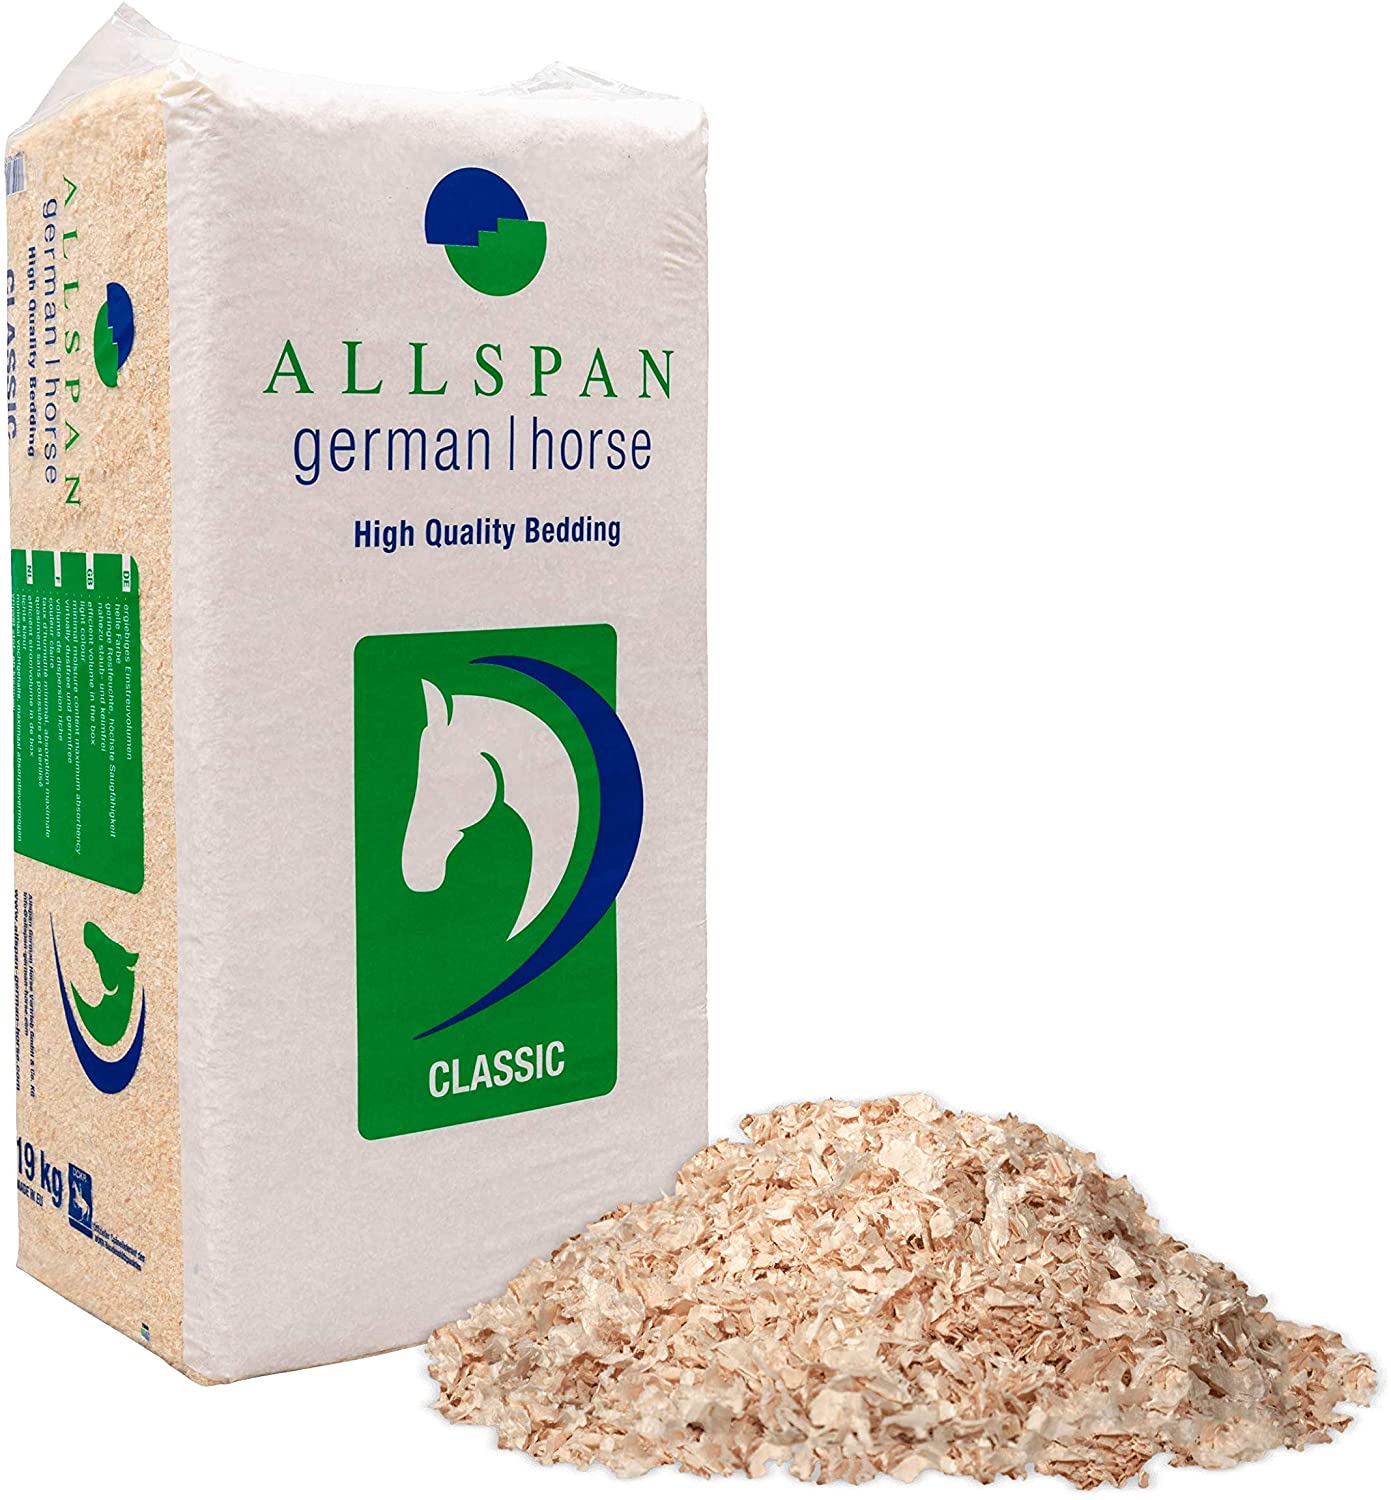 Allspan Classic Spuce can be used for hamsters